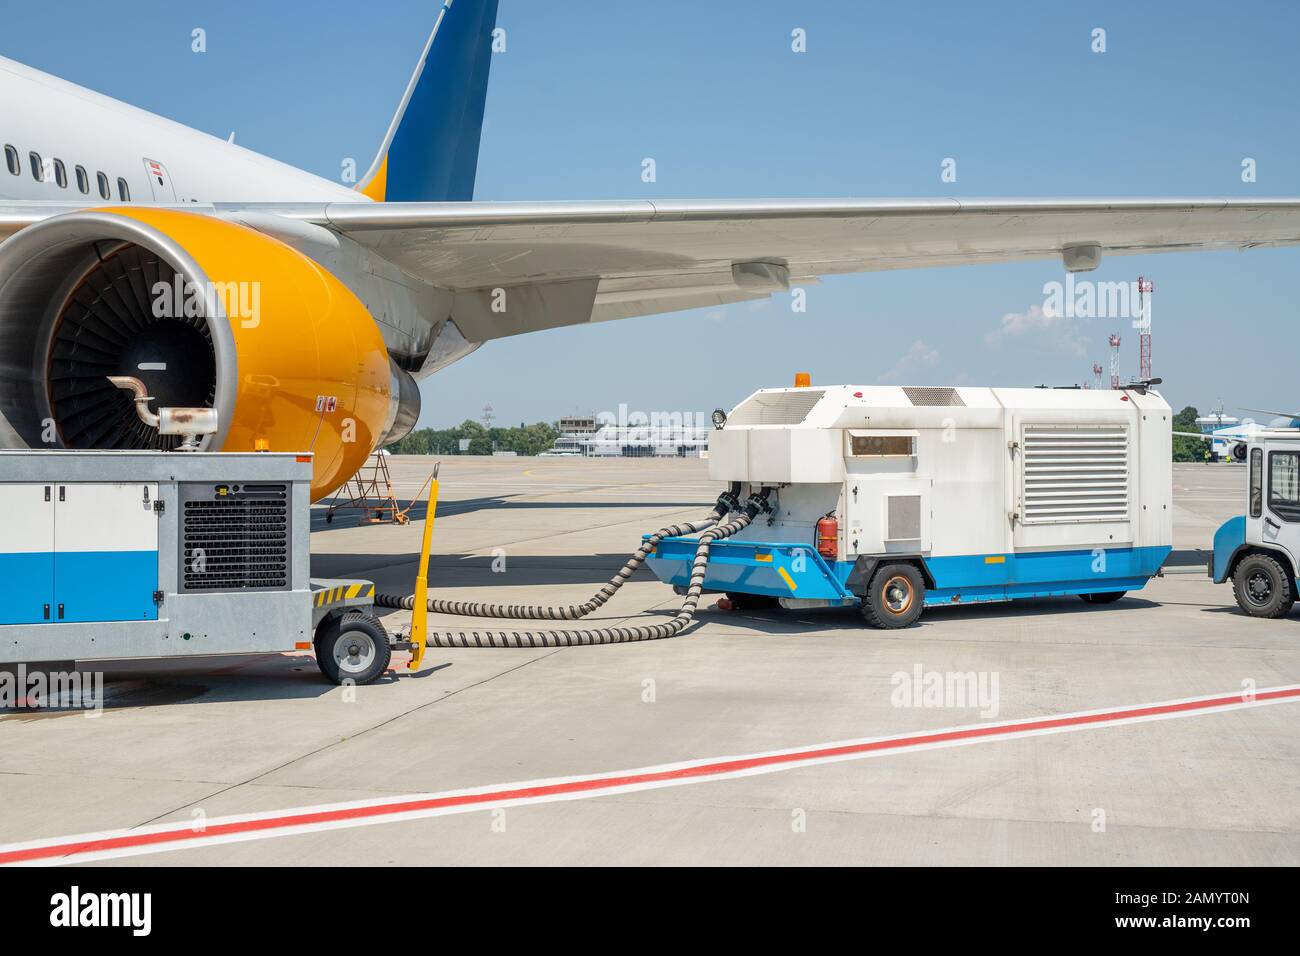 Big modern commercial plane parked on airport runway and connected to ground supply power unit. Aircraft maintenance service and check-up before Stock Photo